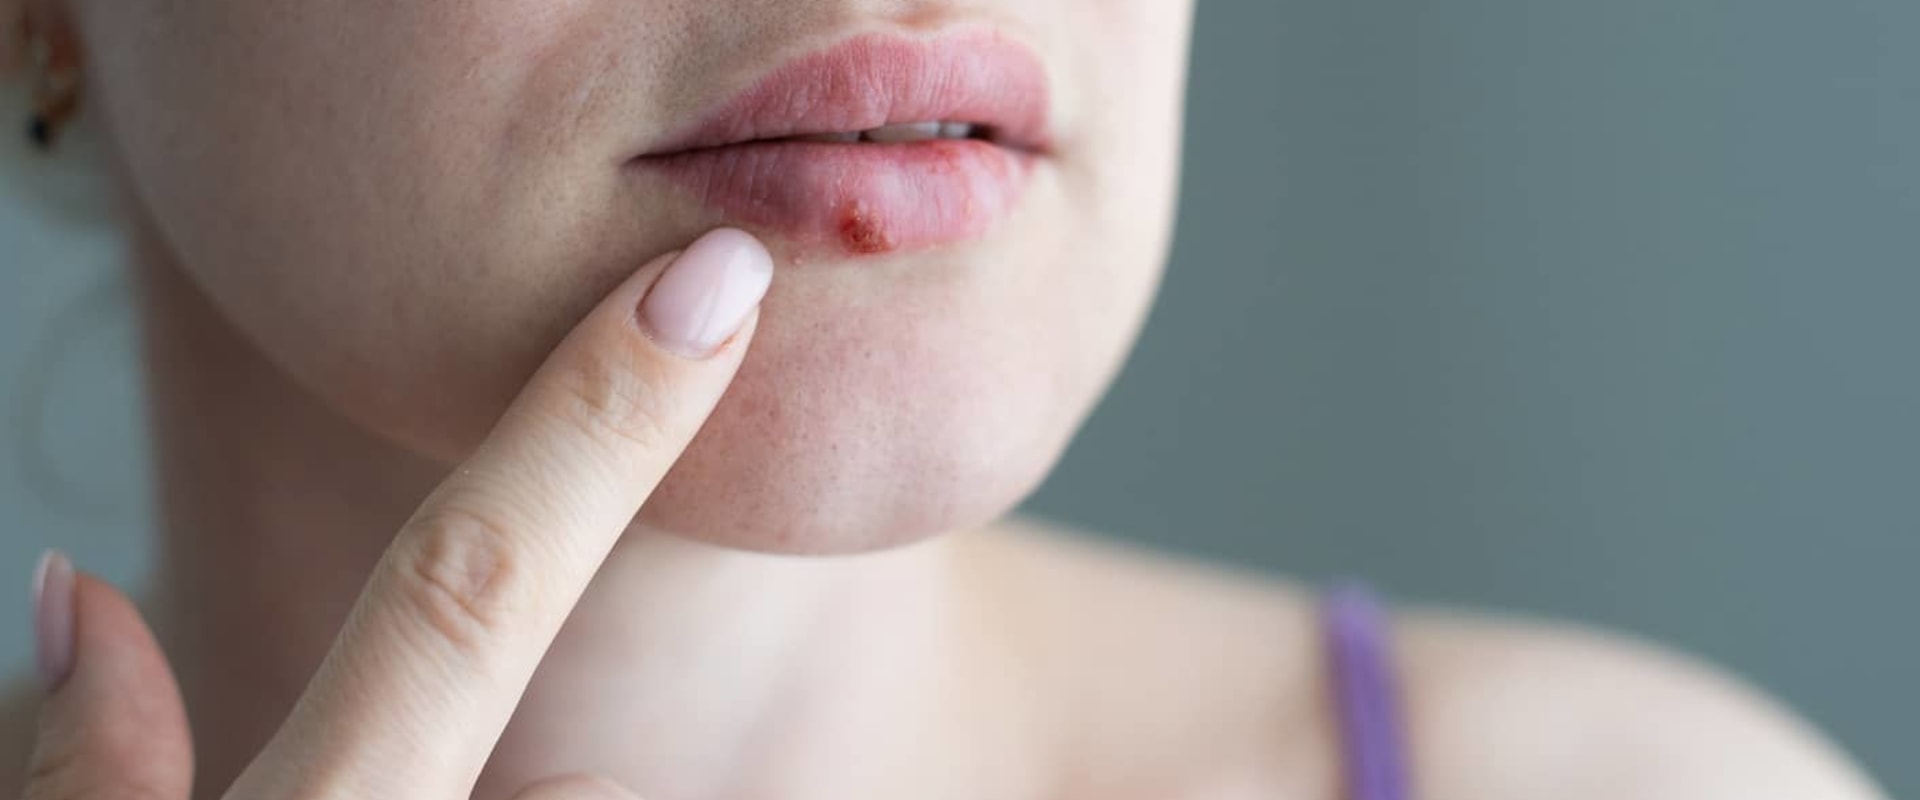 How Long Does Herpes Take to Heal?